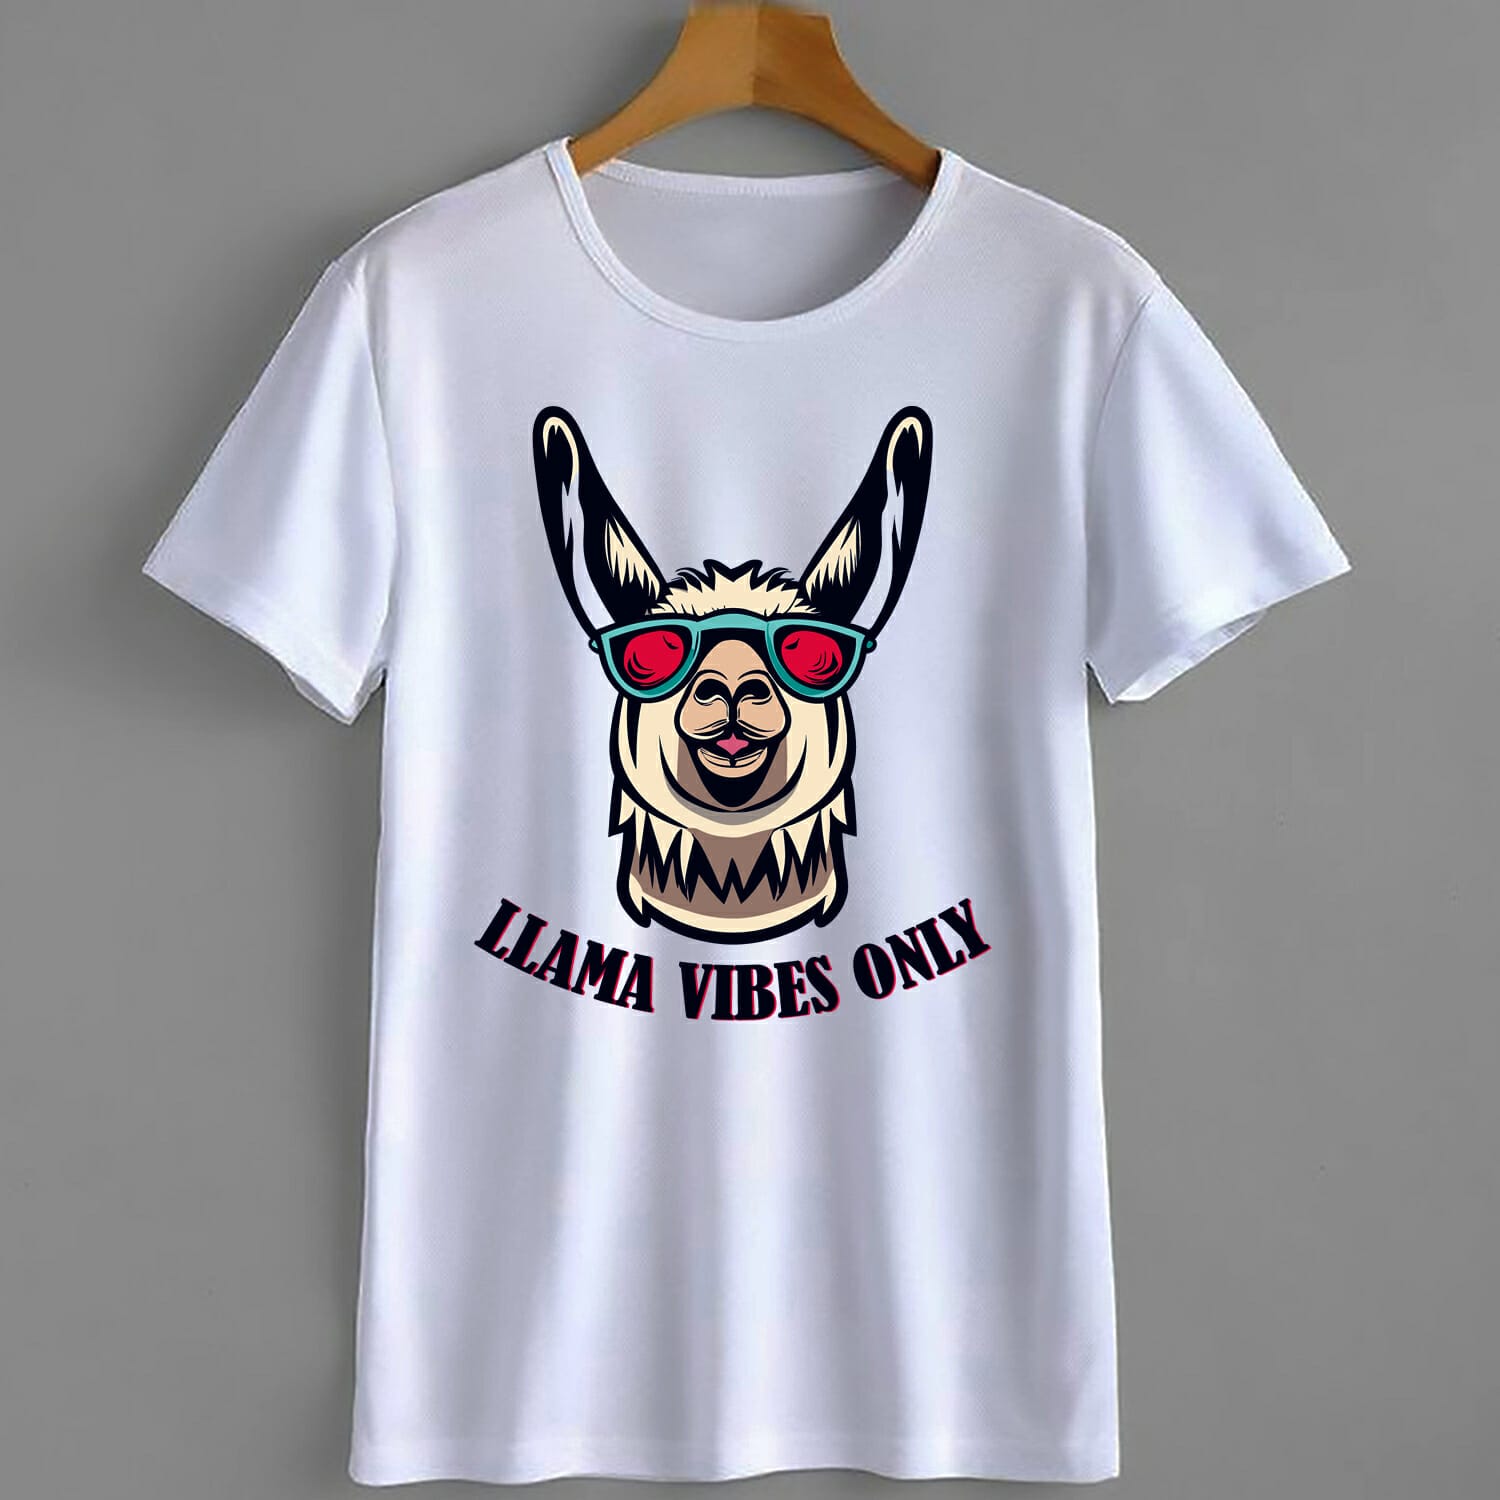 Llama Vibes Only T-Shirt Design For Free